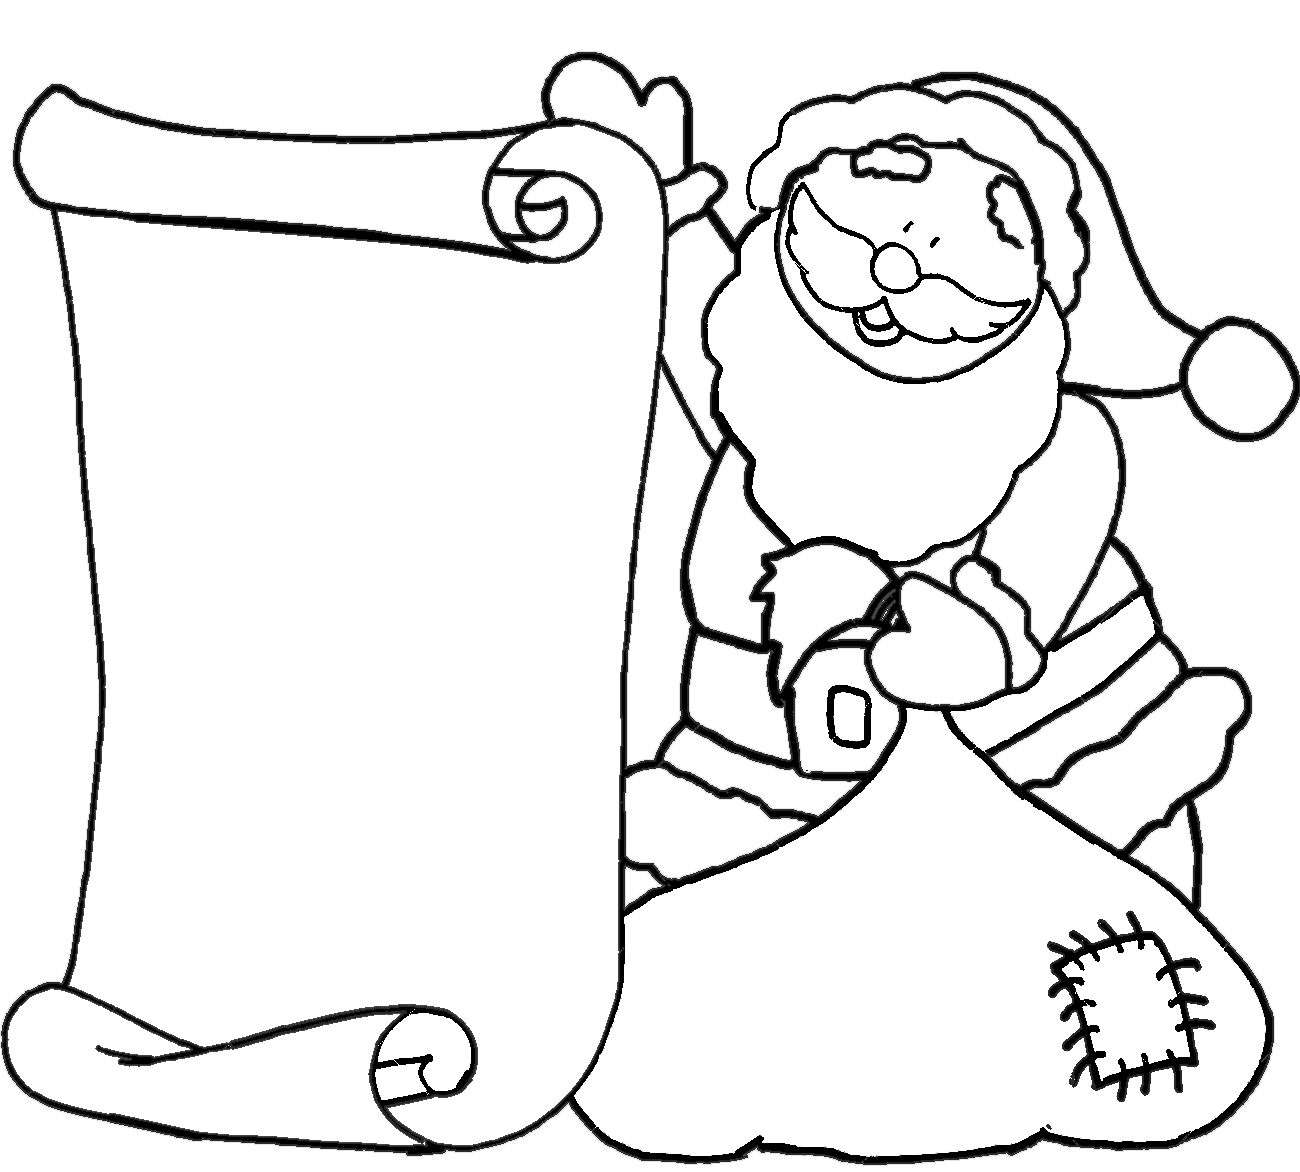 Santa Image For Children Coloring Page